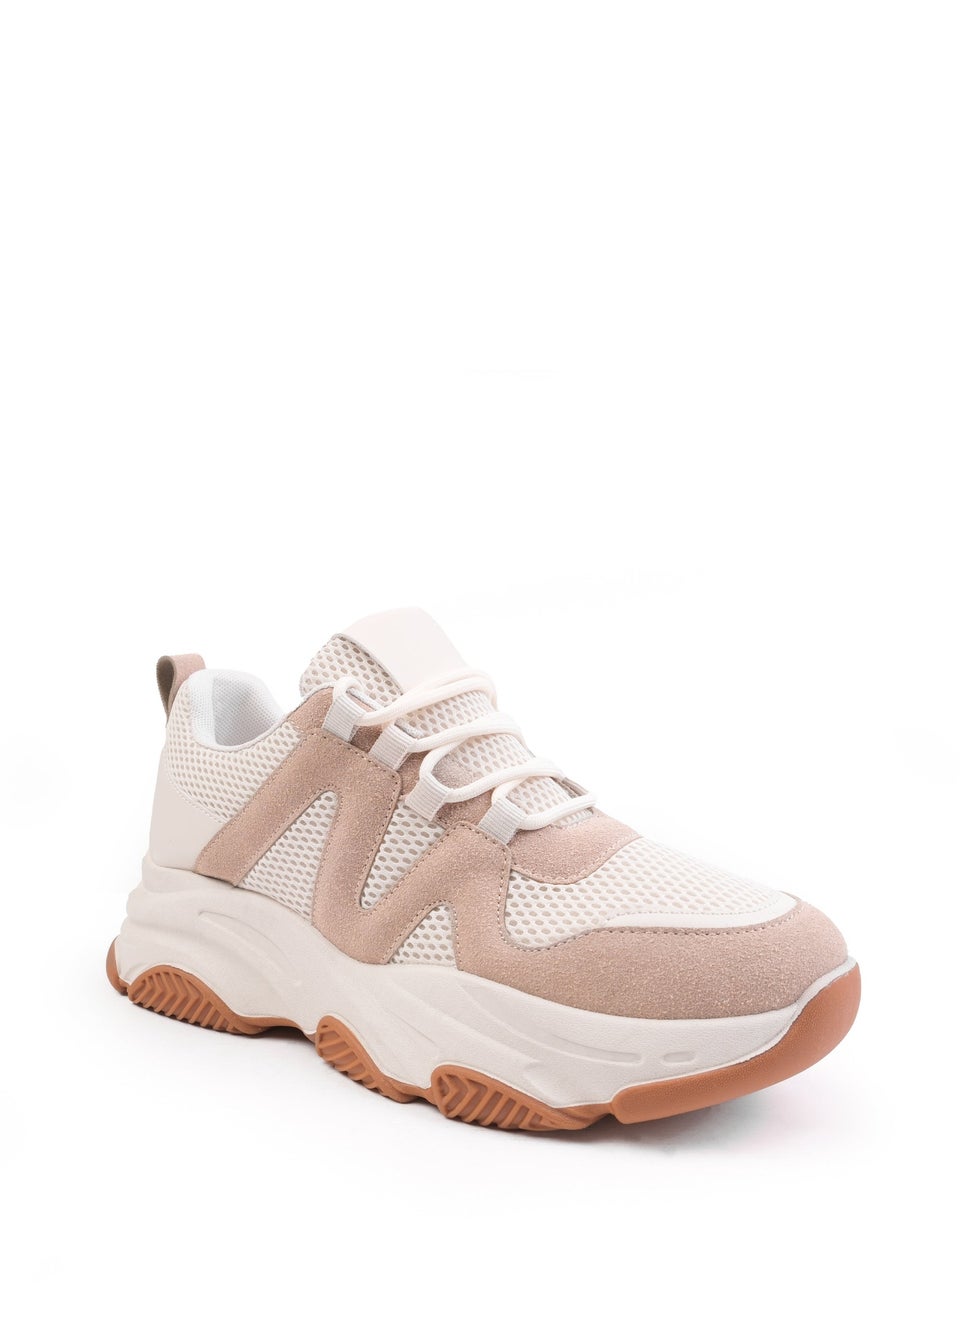 Where's That From Cream Chunky Sole Mesh Trainers